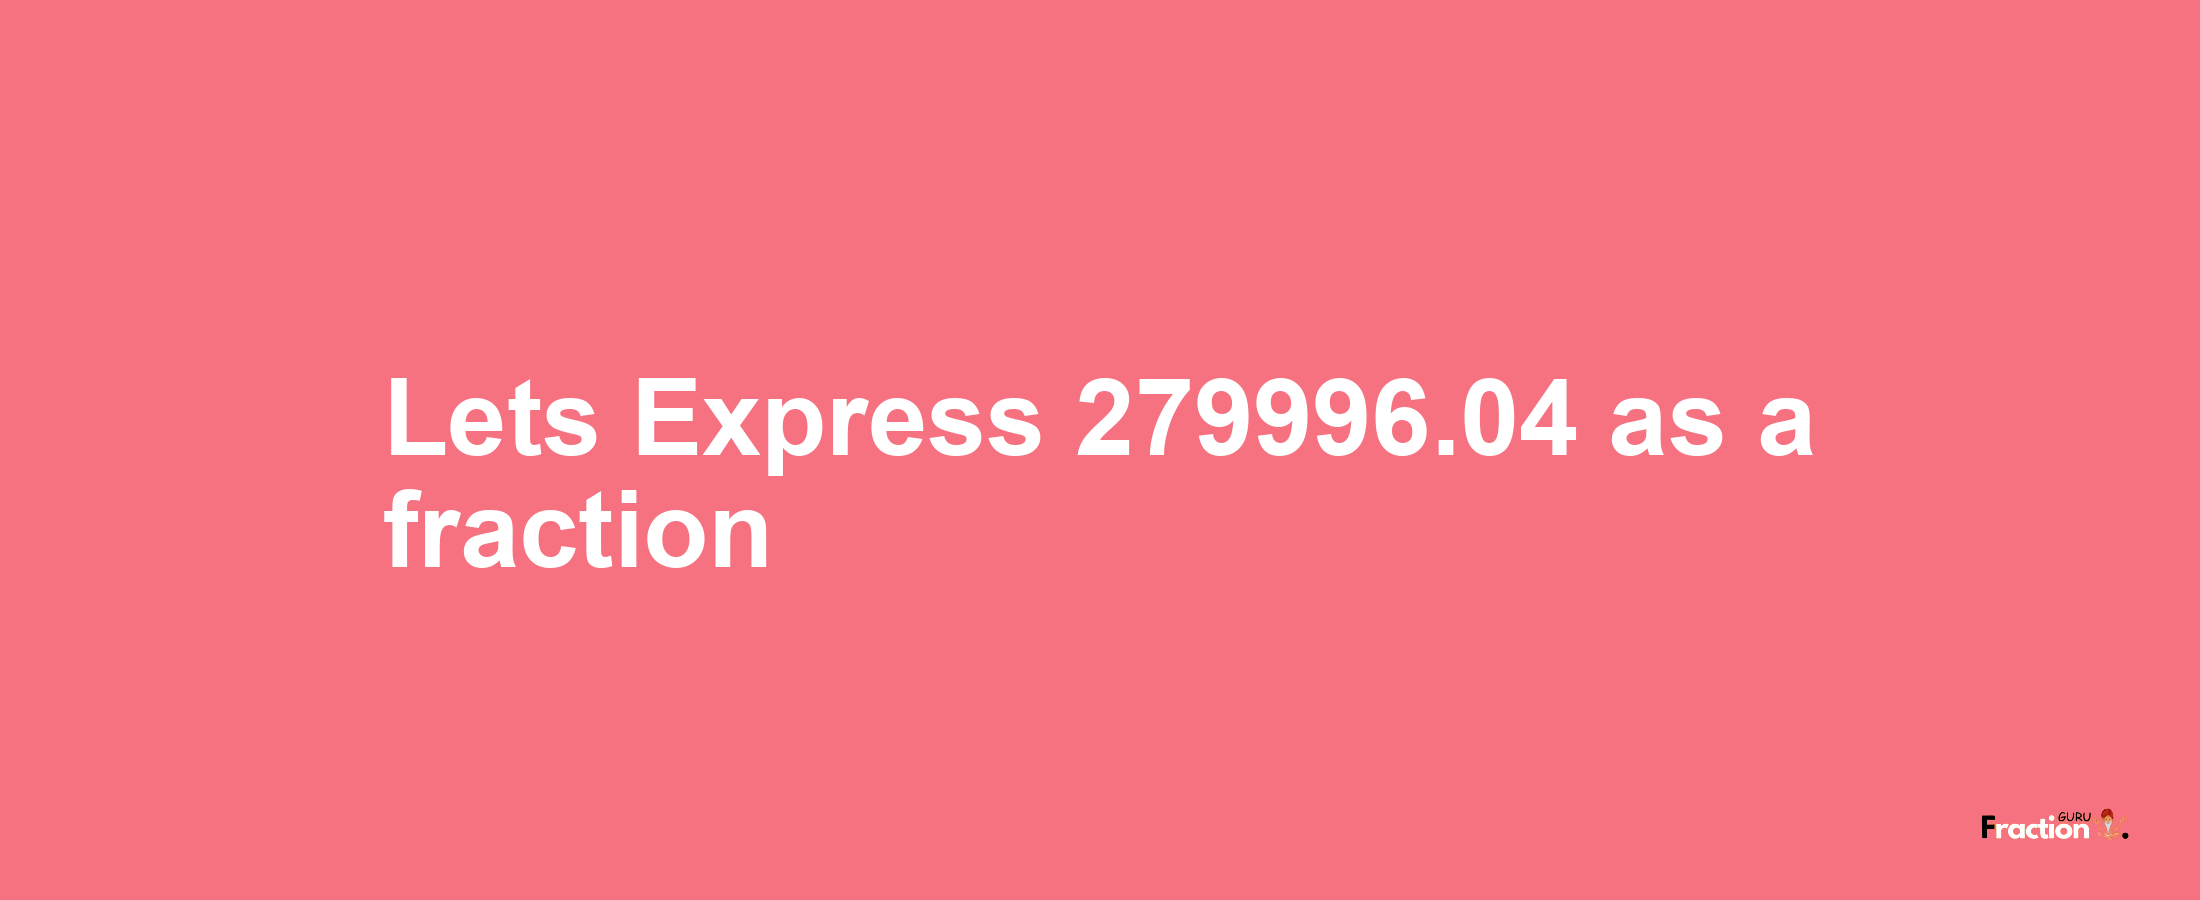 Lets Express 279996.04 as afraction